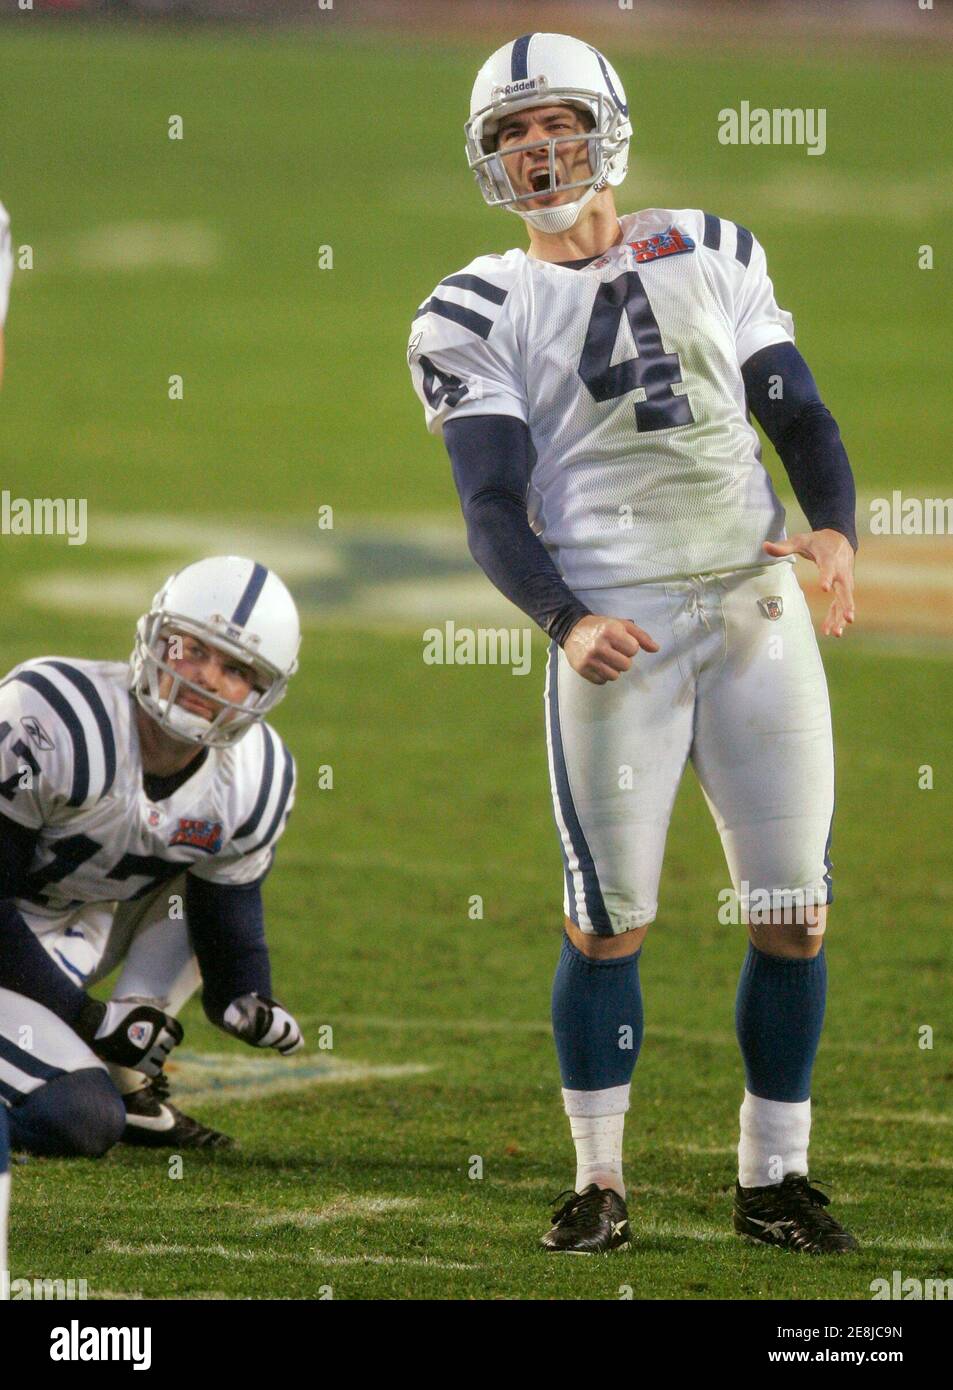 Indianapolis Colts Adam Vinatieri reacts to missing a field goal against the Chicago Bears in the second quarter of the NFL's Super Bowl XLI football game in Miami, Florida, February 4, 2007. Holder Hunter Smith watches at left. REUTERS/Gary Cameron (UNITED STATES) Stock Photo